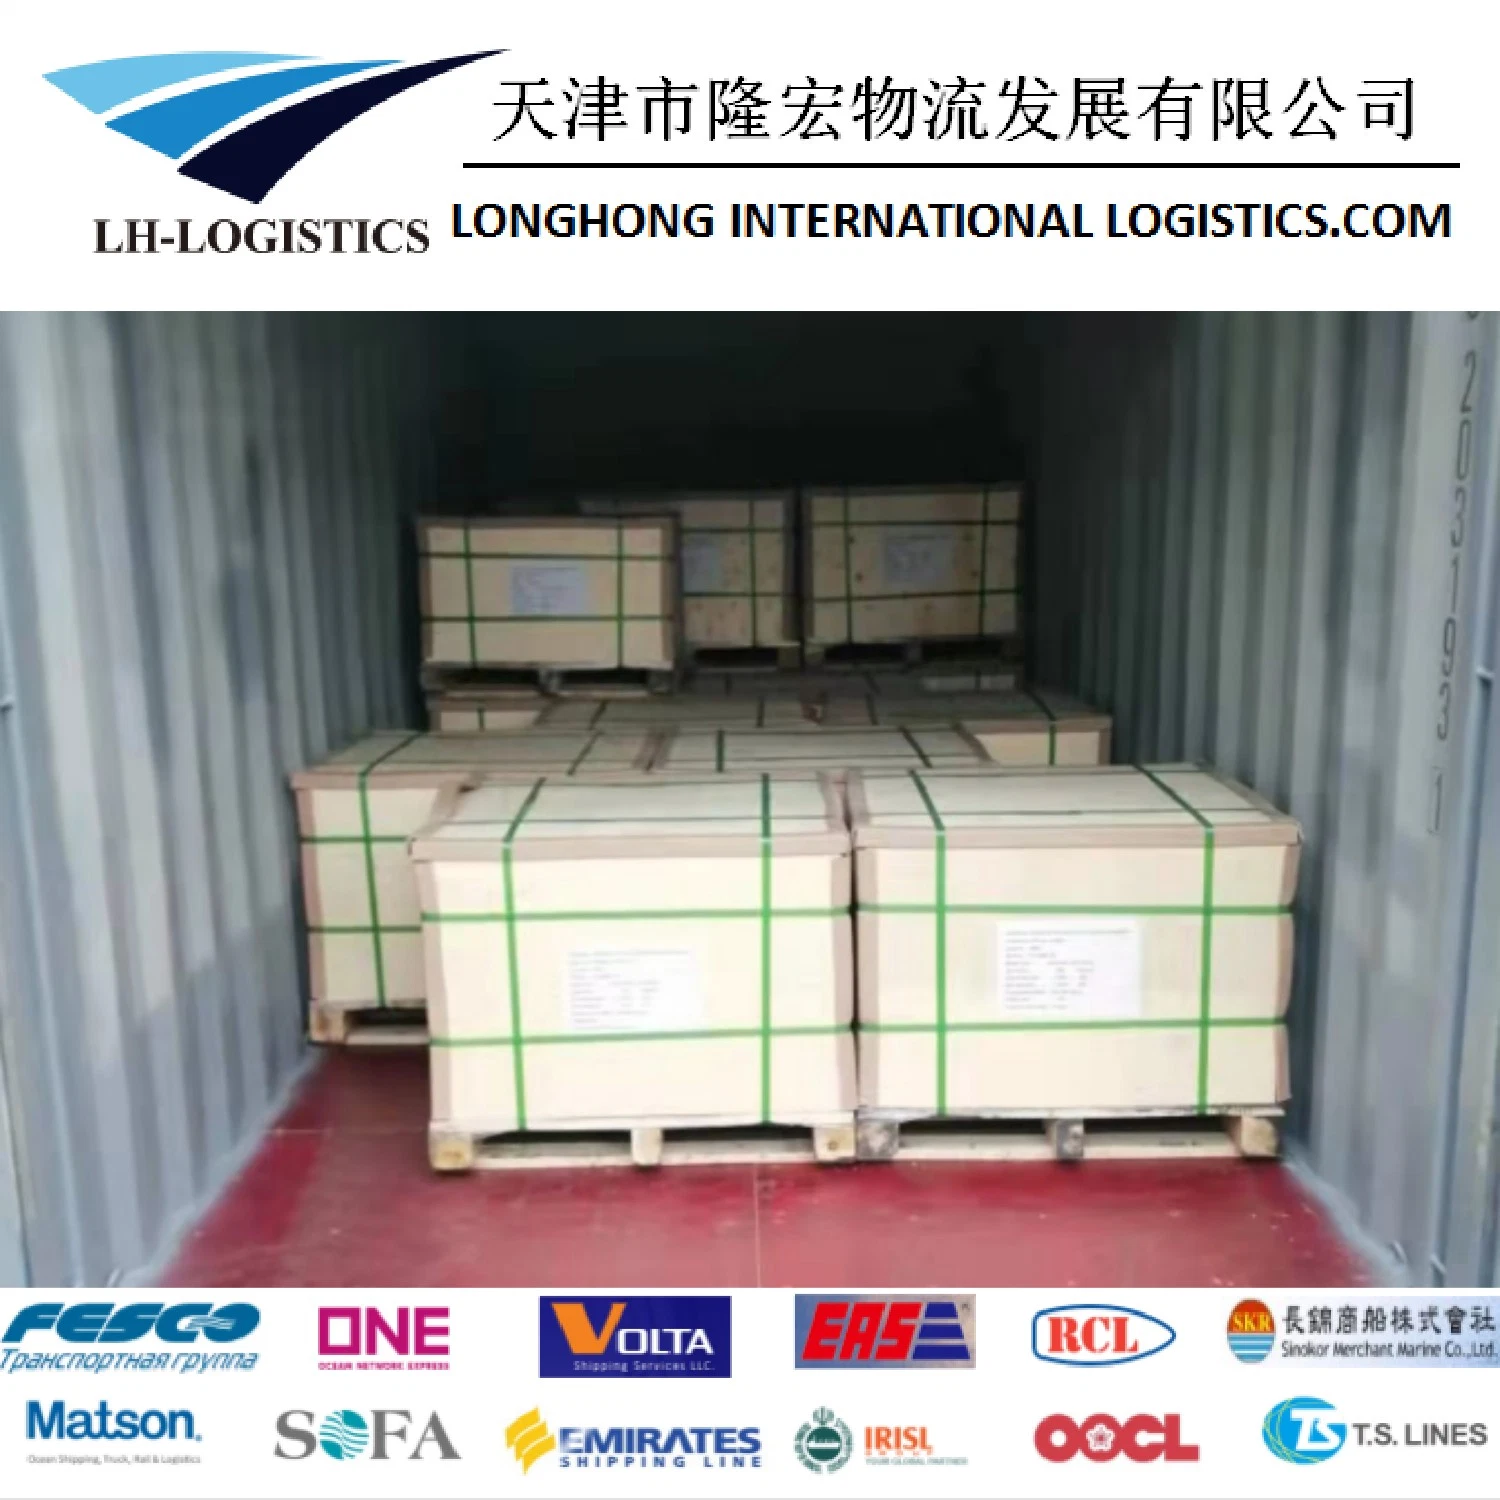 Professional Shipping Service From China to Ho Chi Minh, Southeast Asia. Sea Shipping Boat Logistics.